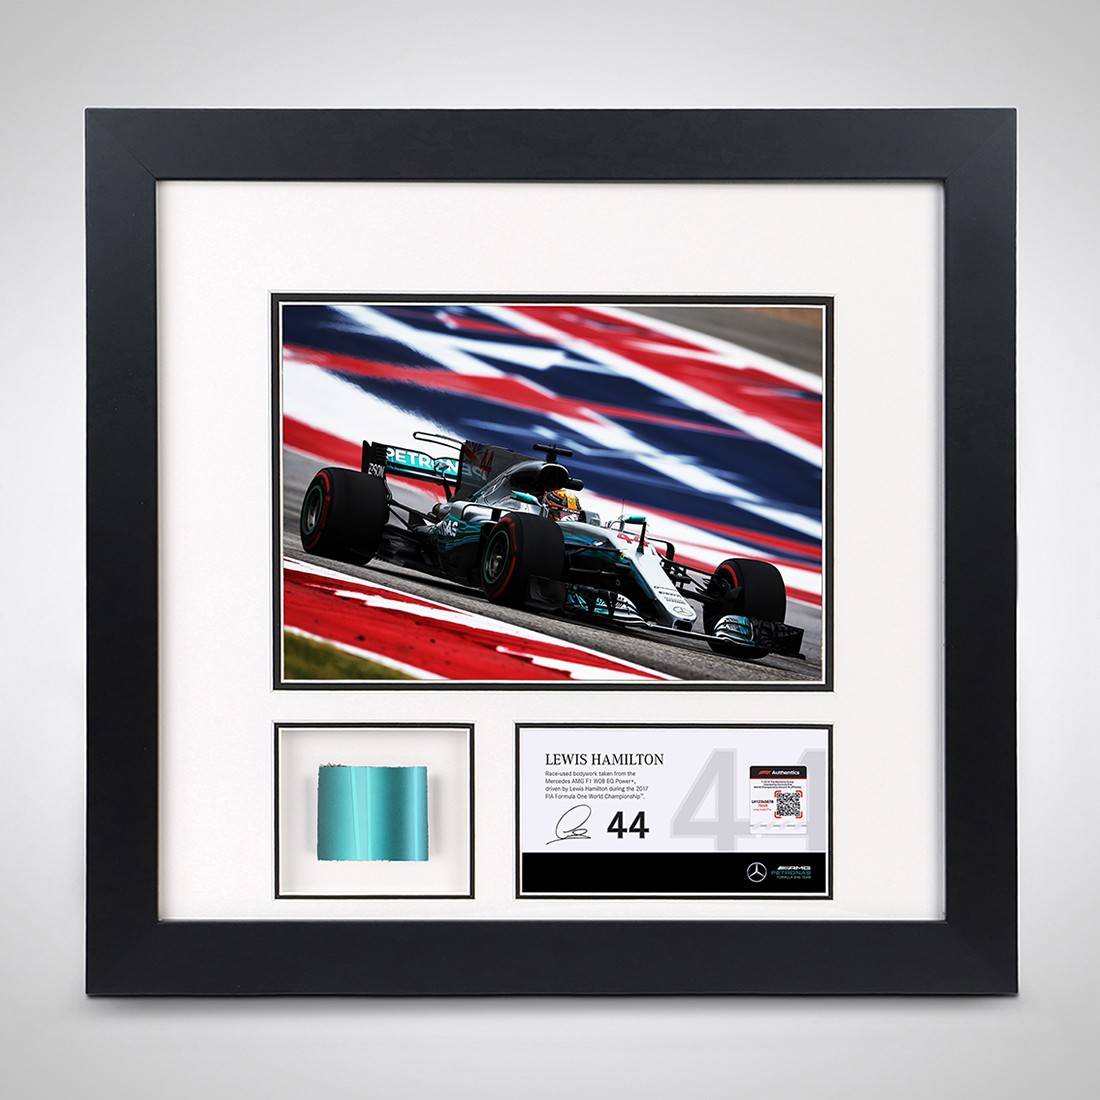 Framed picture of Lewis Hamilton racing in US Grand Prix with a piece of bodywork from car shown 